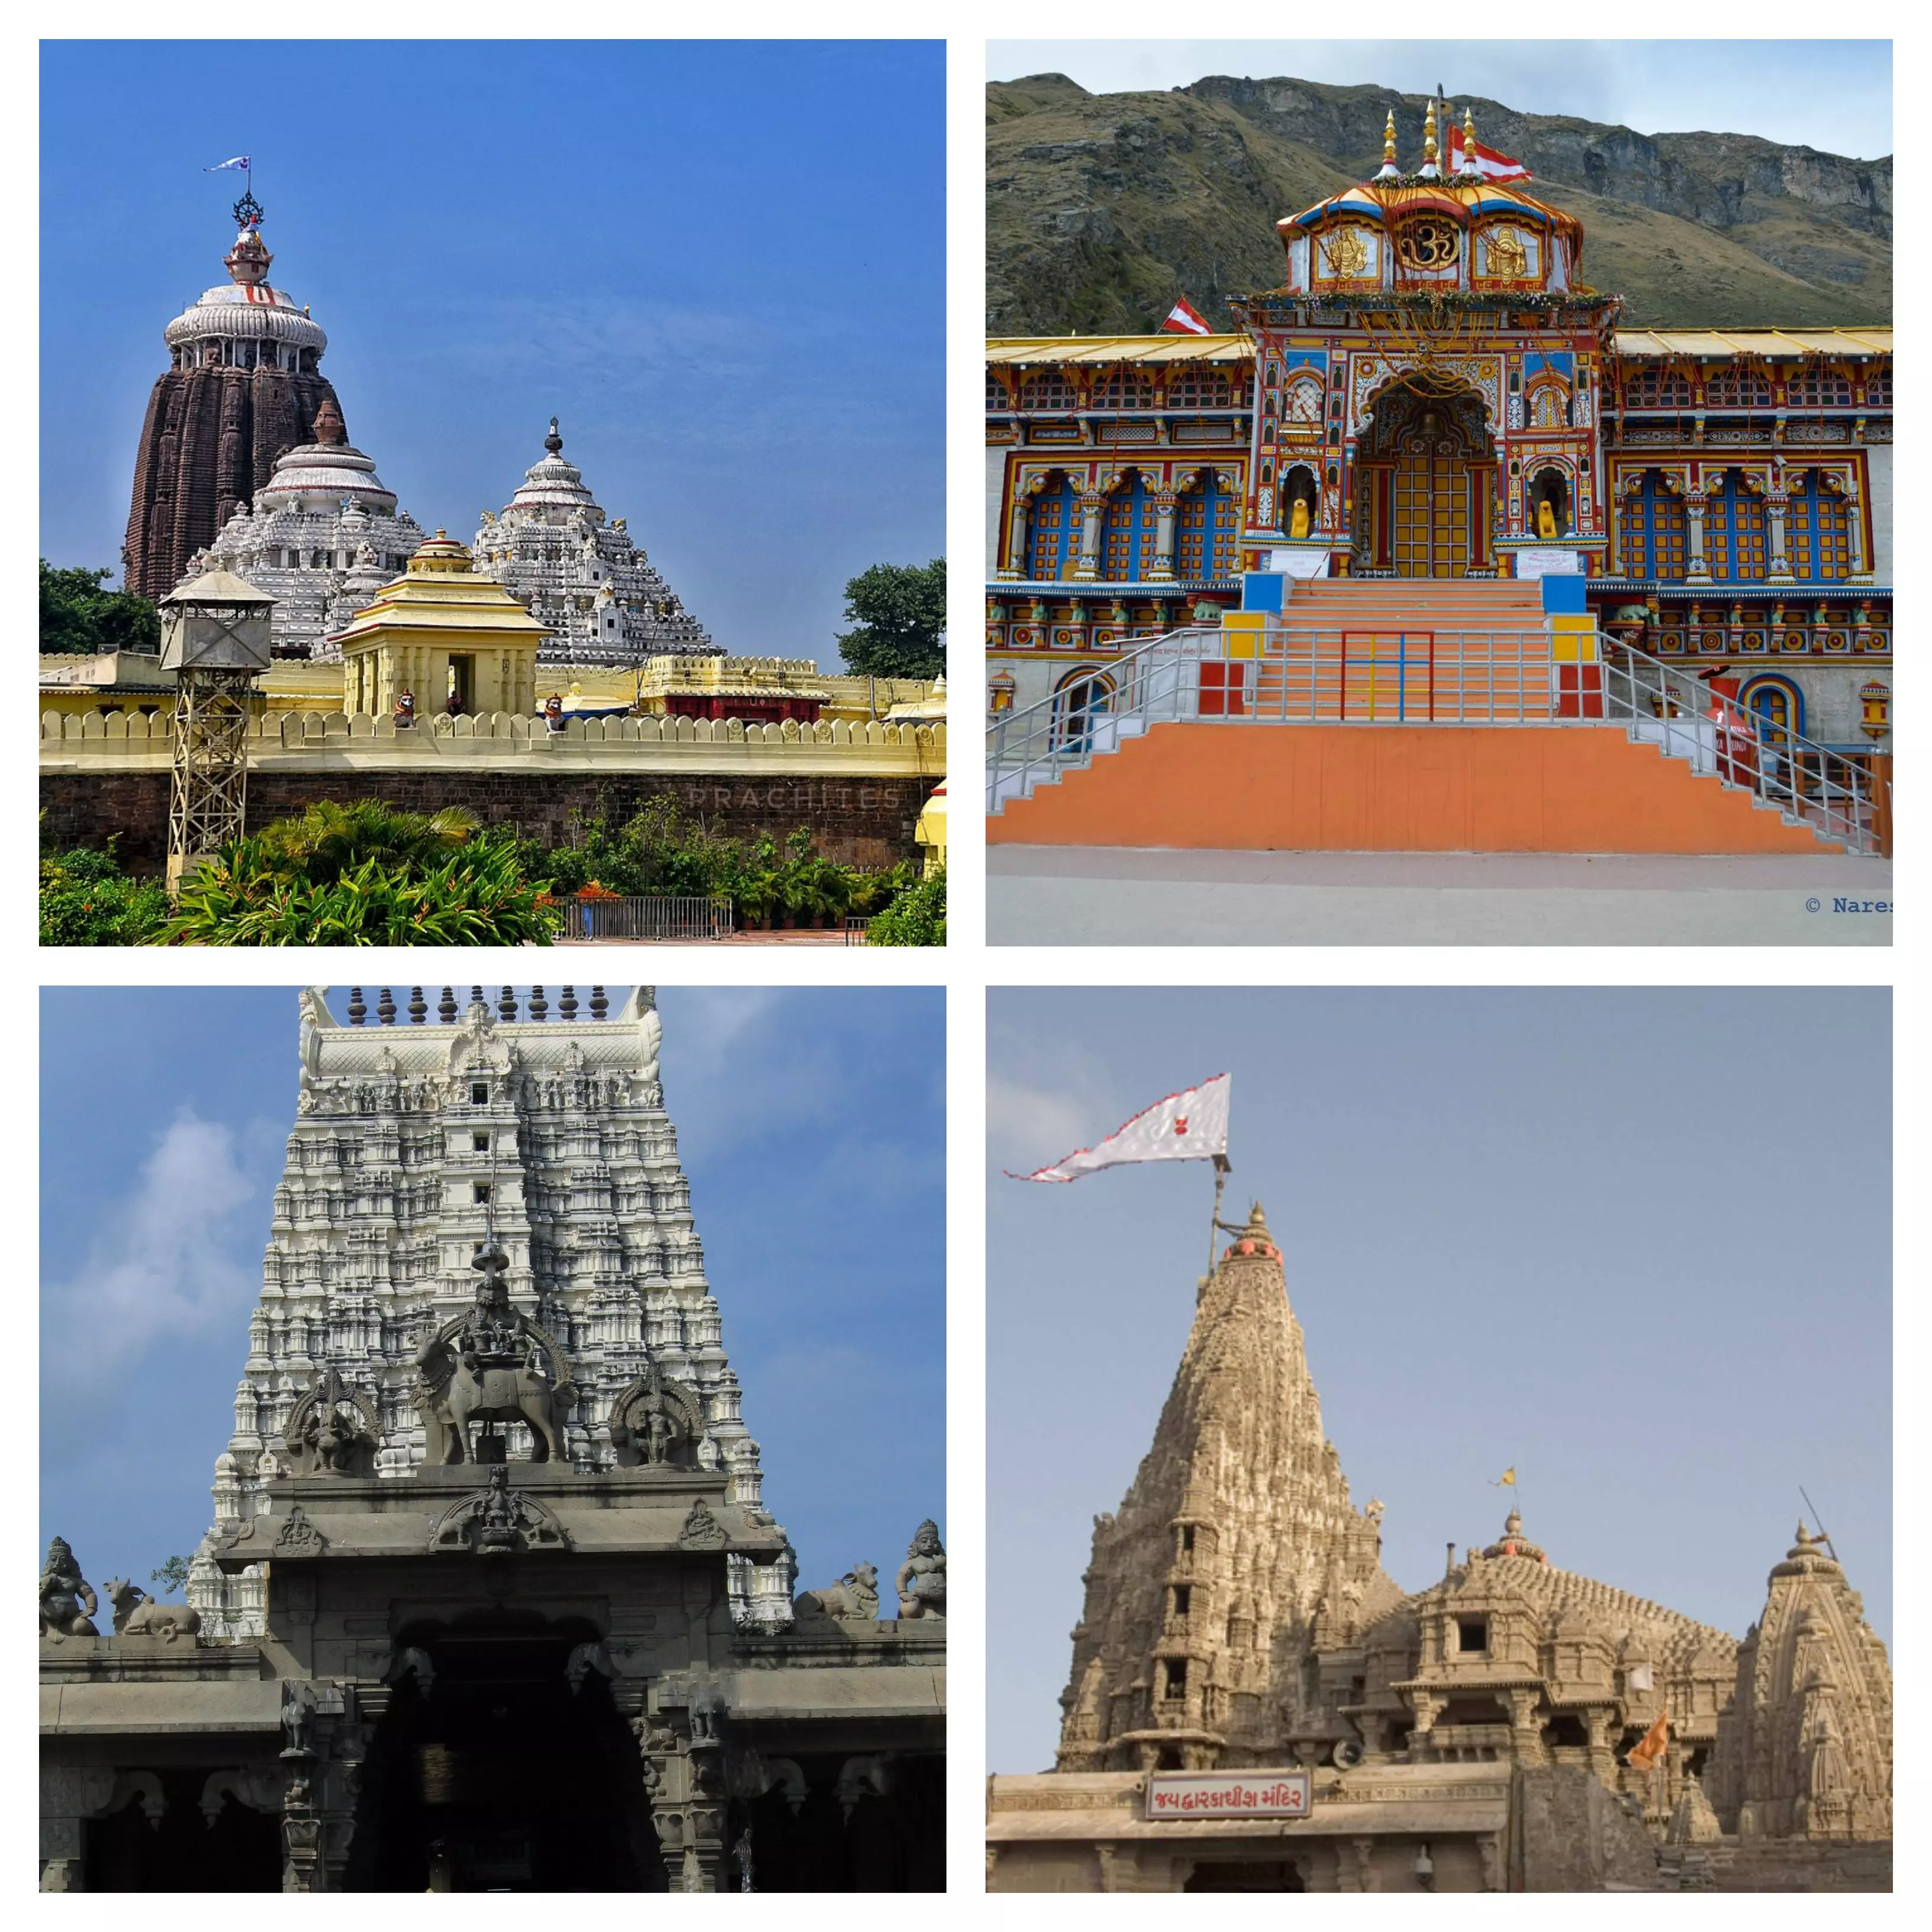 Char Dham pilgrimage sees over 50 lakh visitors for the first time